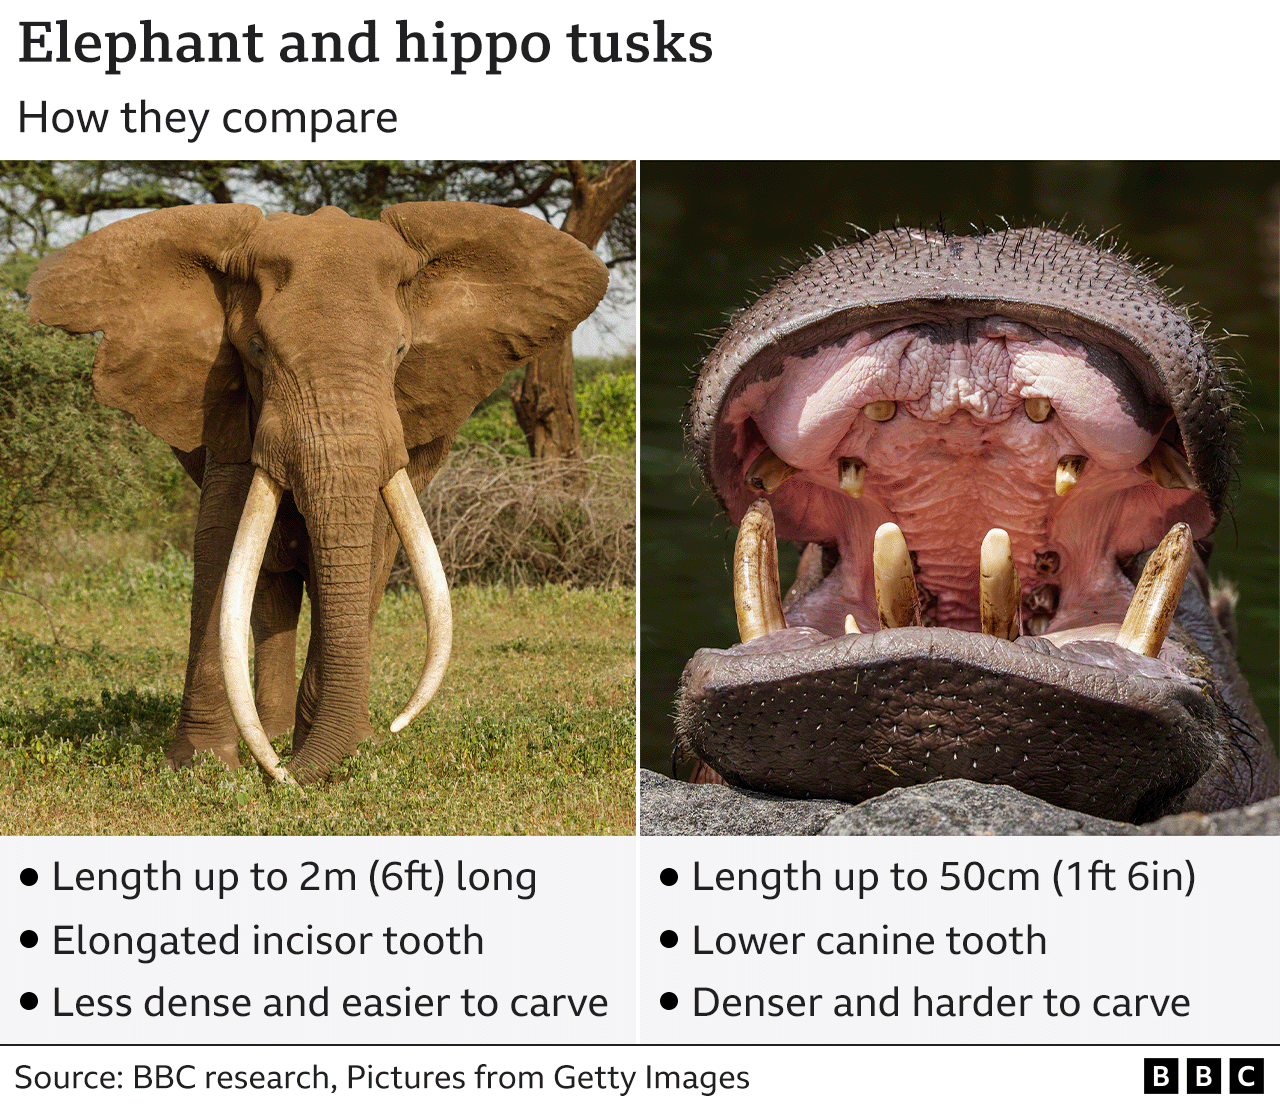 Graphic comparing elephant and hippo tusks